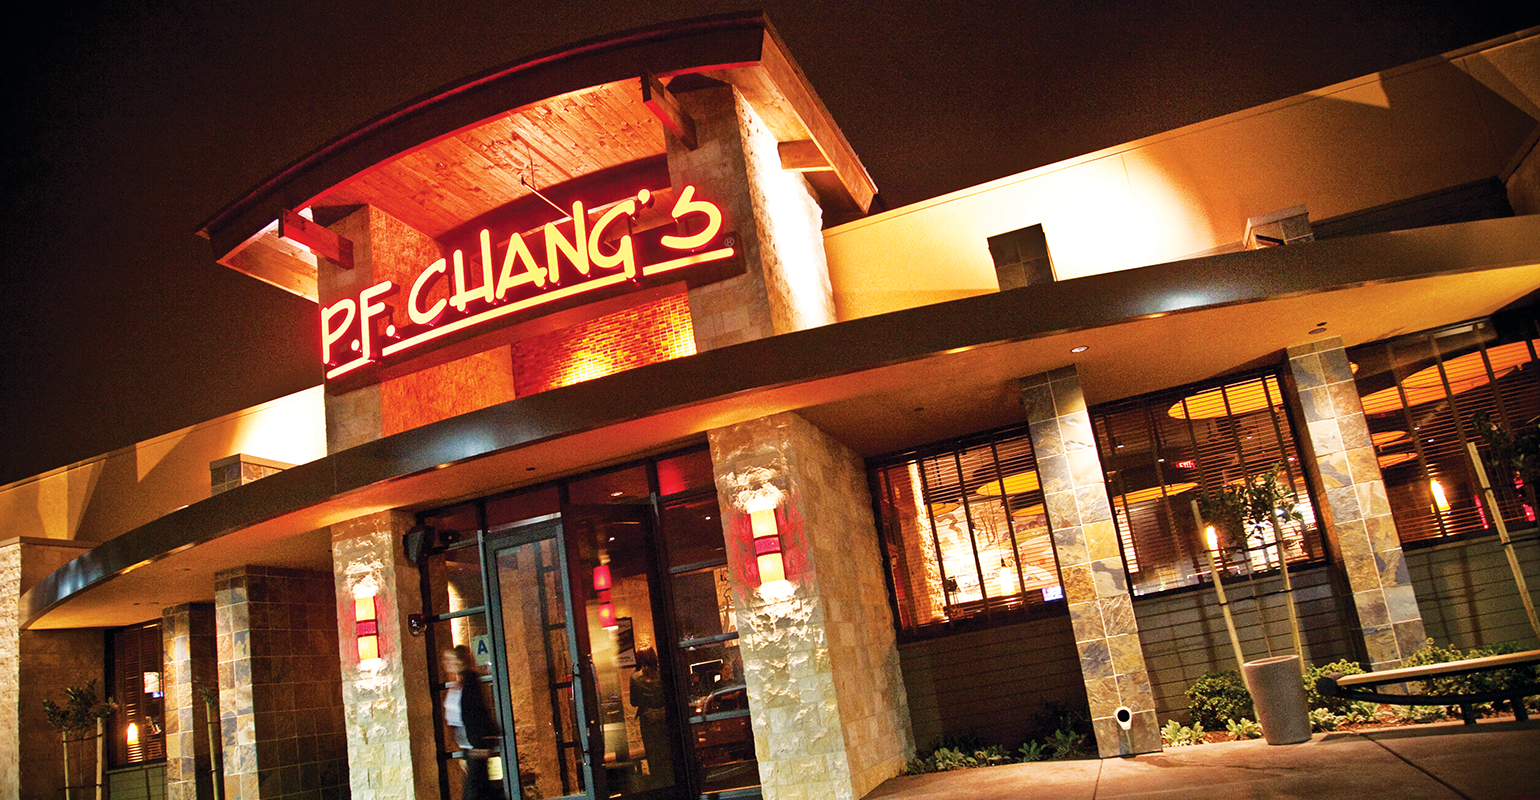 P F Chang S Completes Sale To Triartisan Capital Advisors Nation S Restaurant News